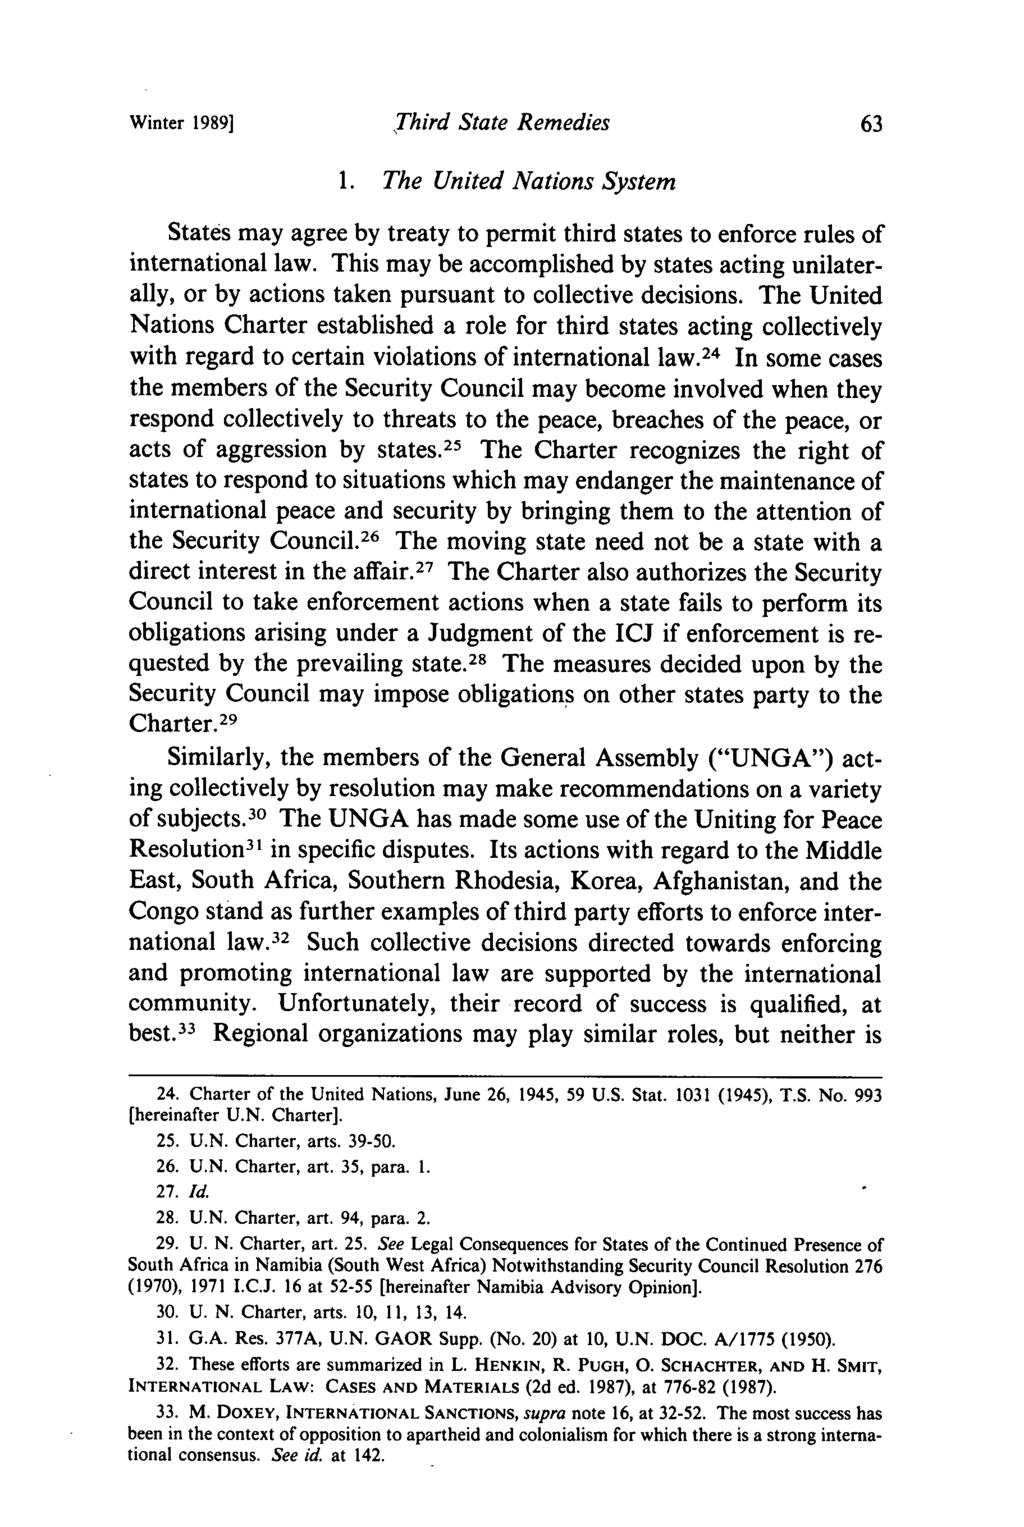 Winter 1989] Third State Remedies 1. The United Nations System States may agree by treaty to permit third states to enforce rules of international law.